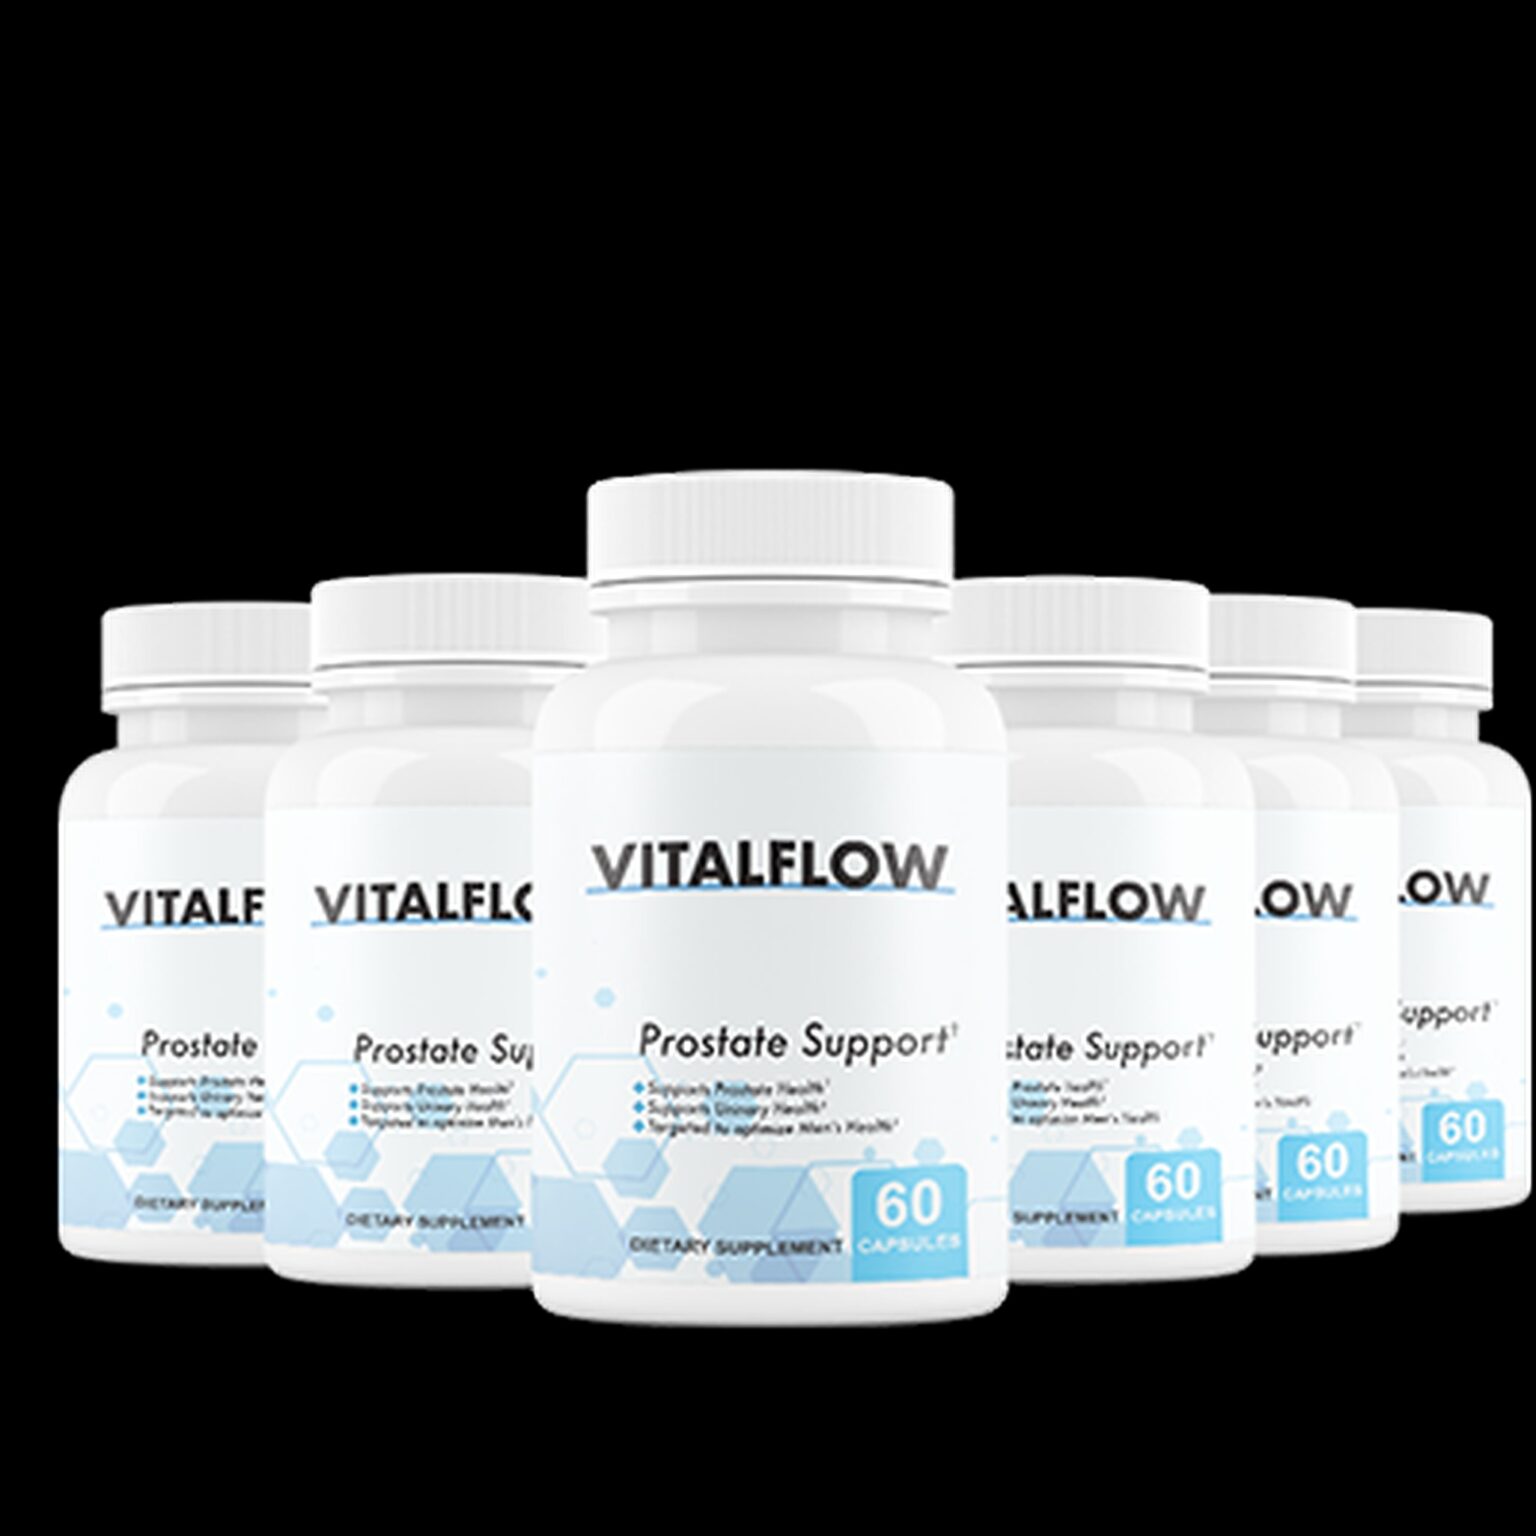 Vitalflow: VitalFlow tablets provide a natural option for the issue of a healthy prostate.